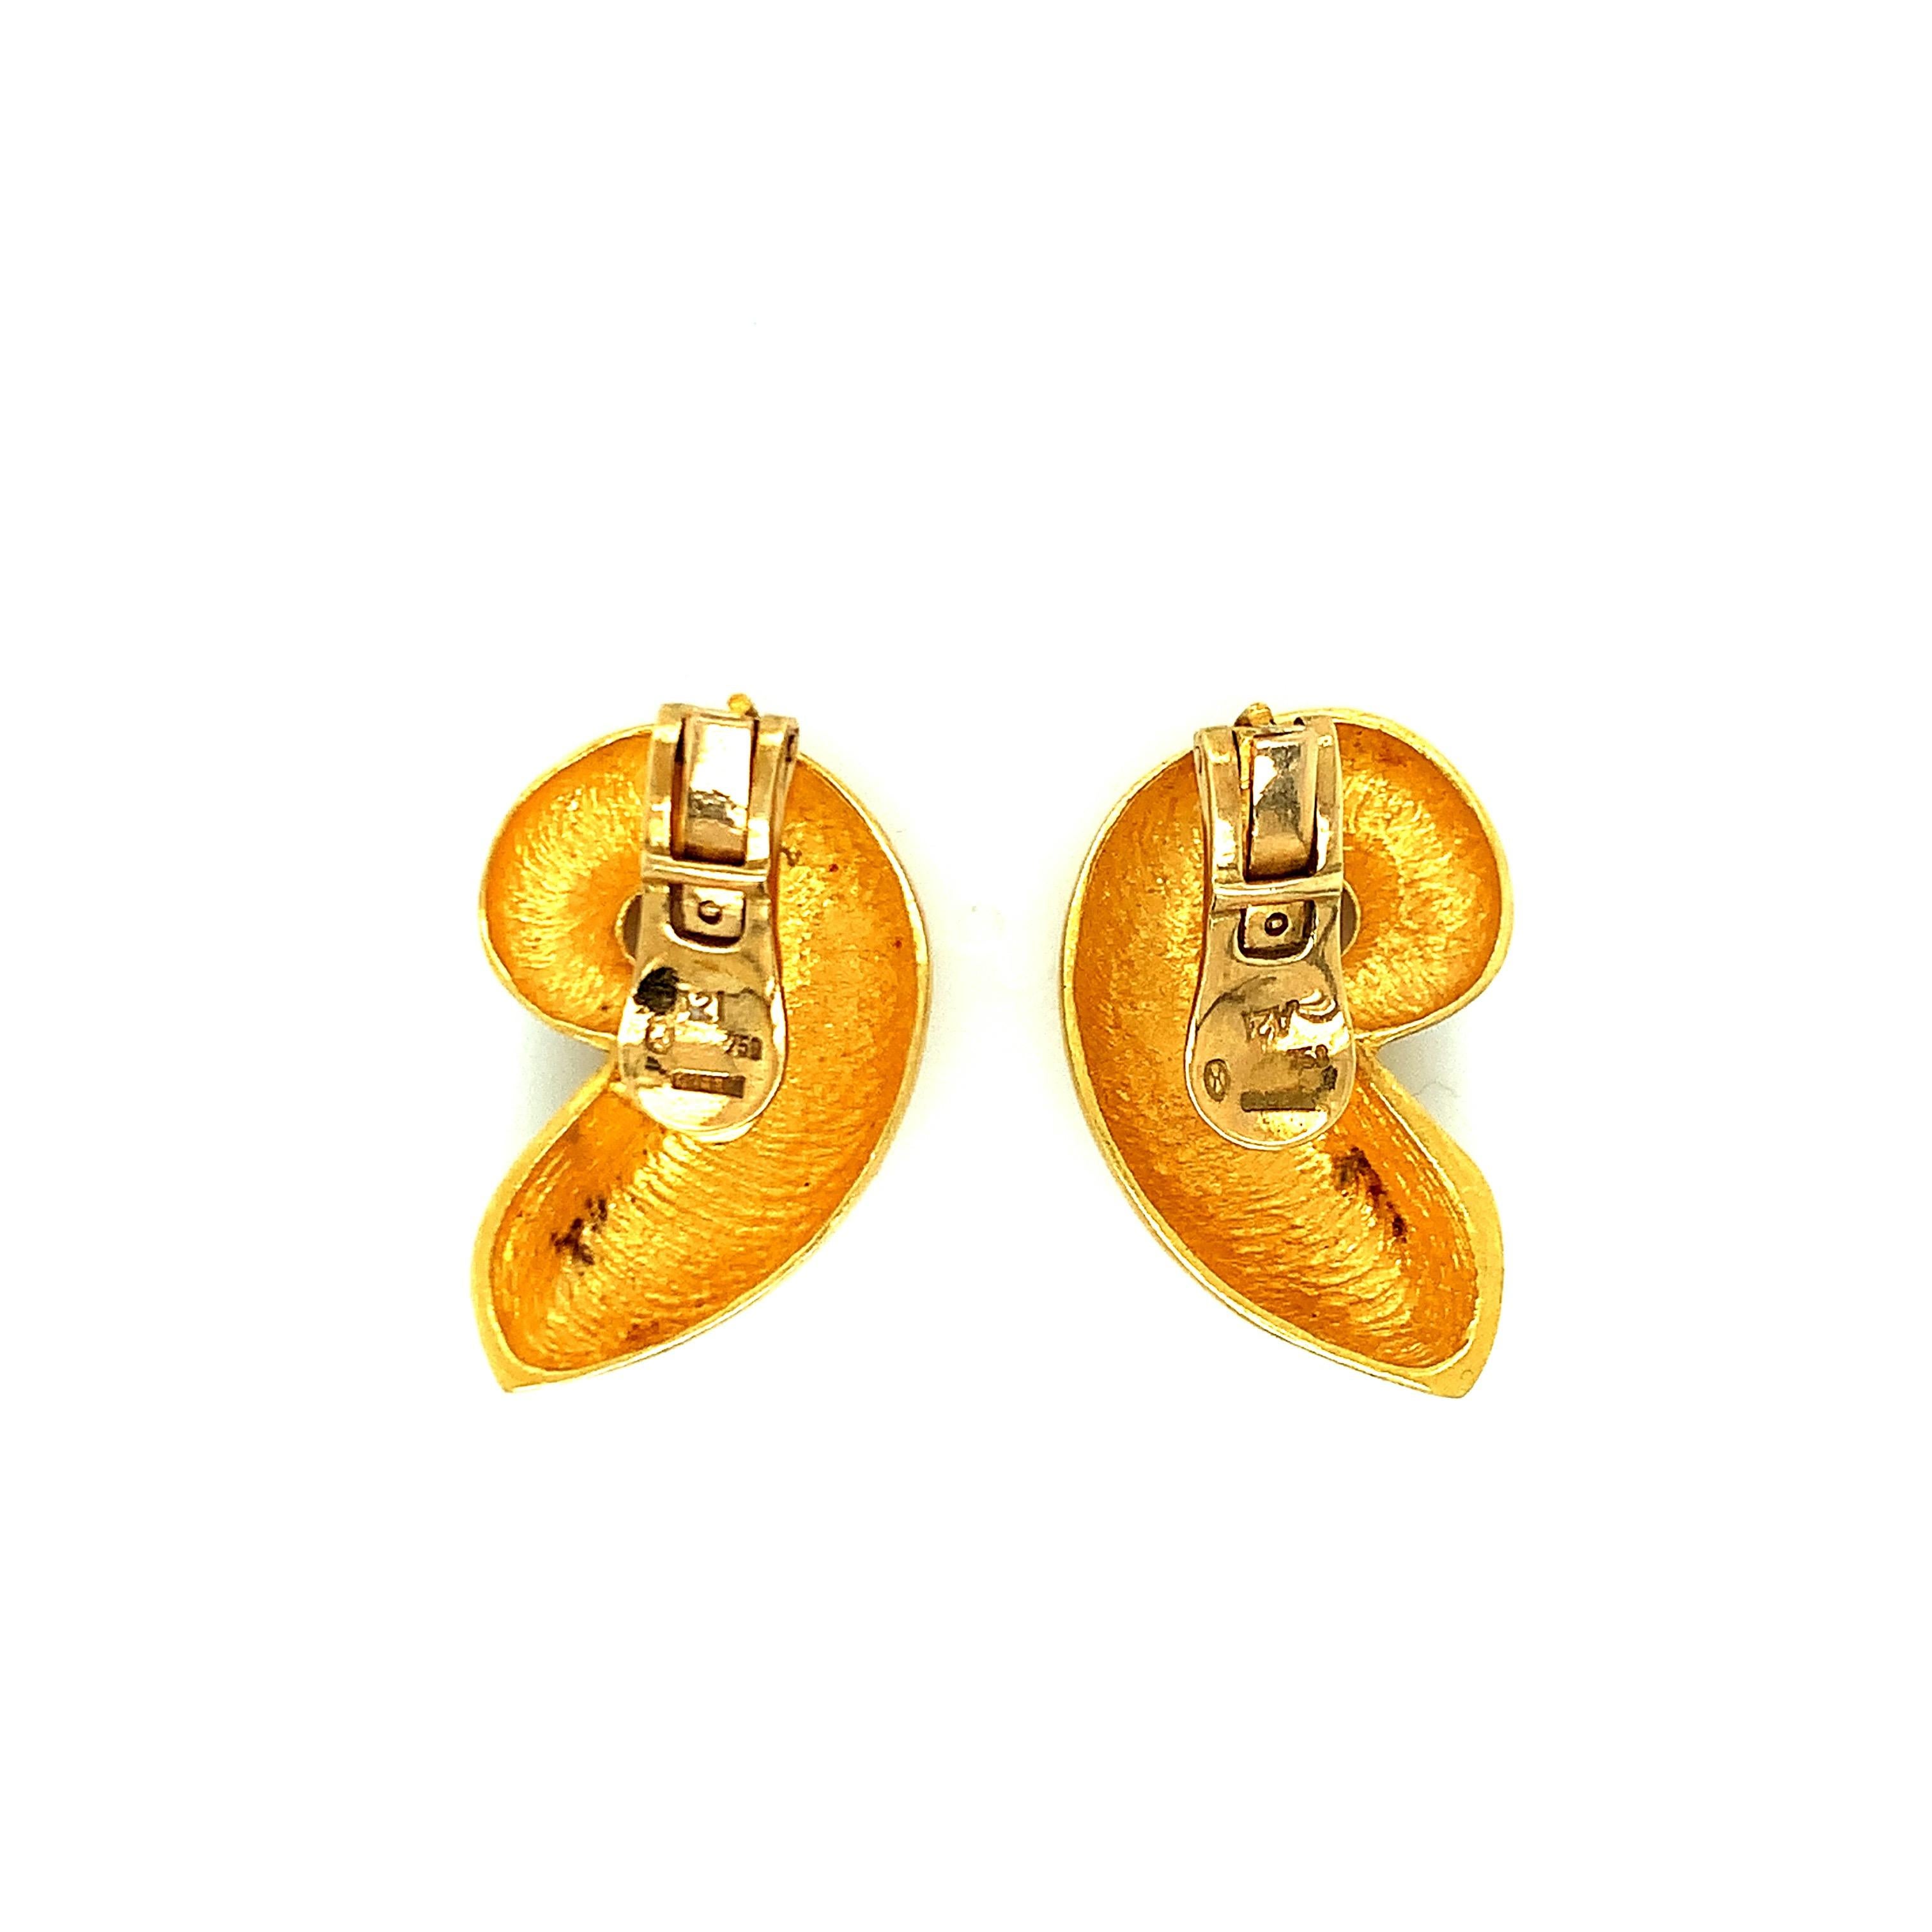 Created by Zolotas, these 18 karat yellow gold ear clips feature a swirl motif. Total weight: 19.8 grams. Length: 3 cm. Width: 2 cm. 

Made in Greece. 